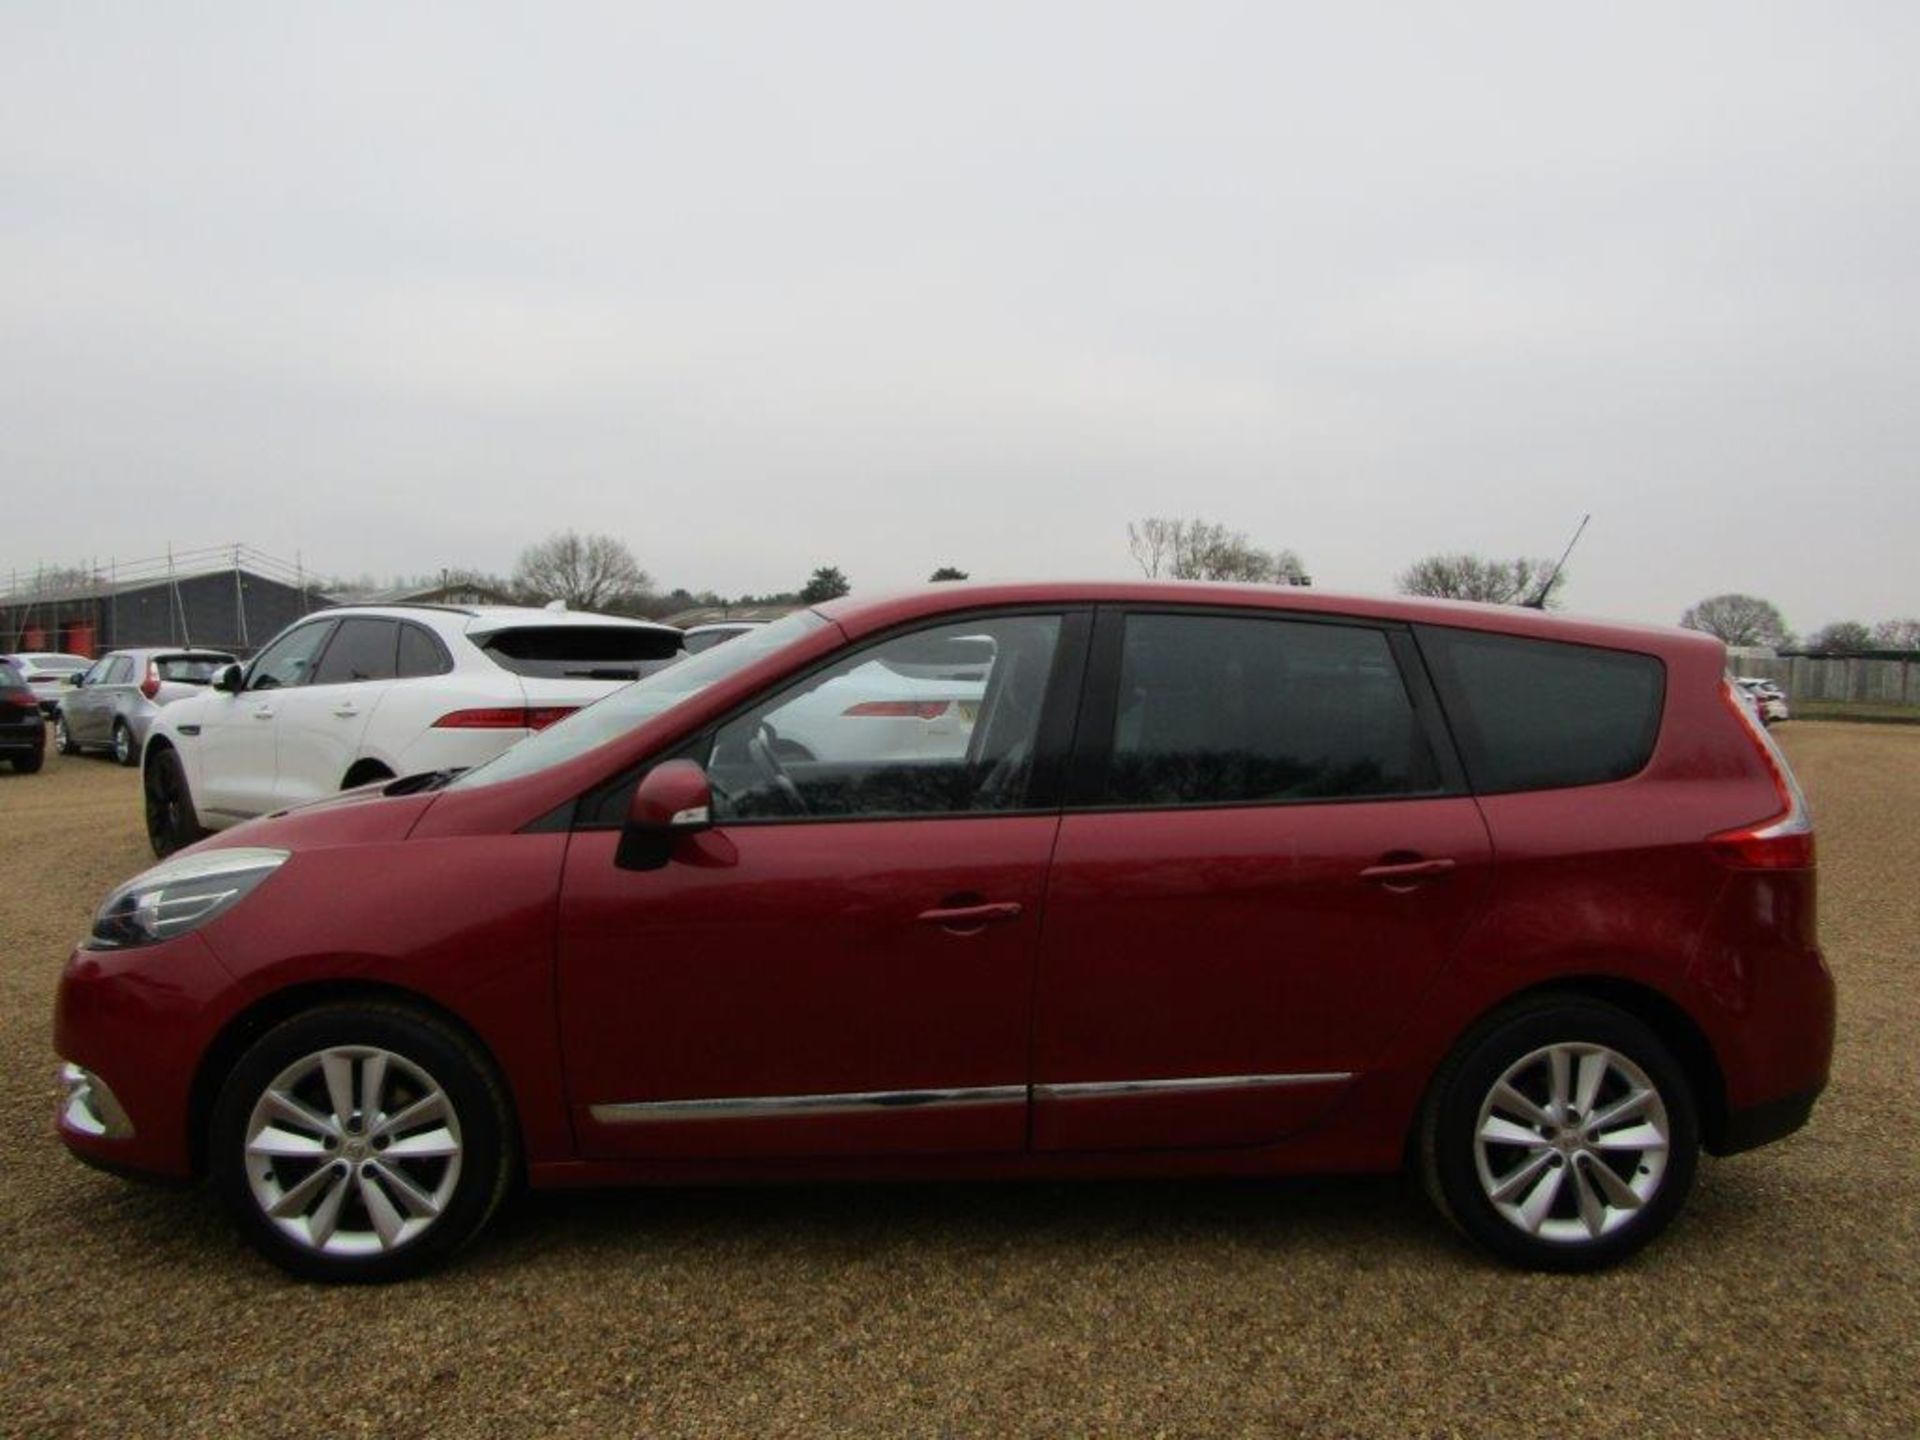 62 12 Renault GScenic D-Quettluxe - Image 4 of 23